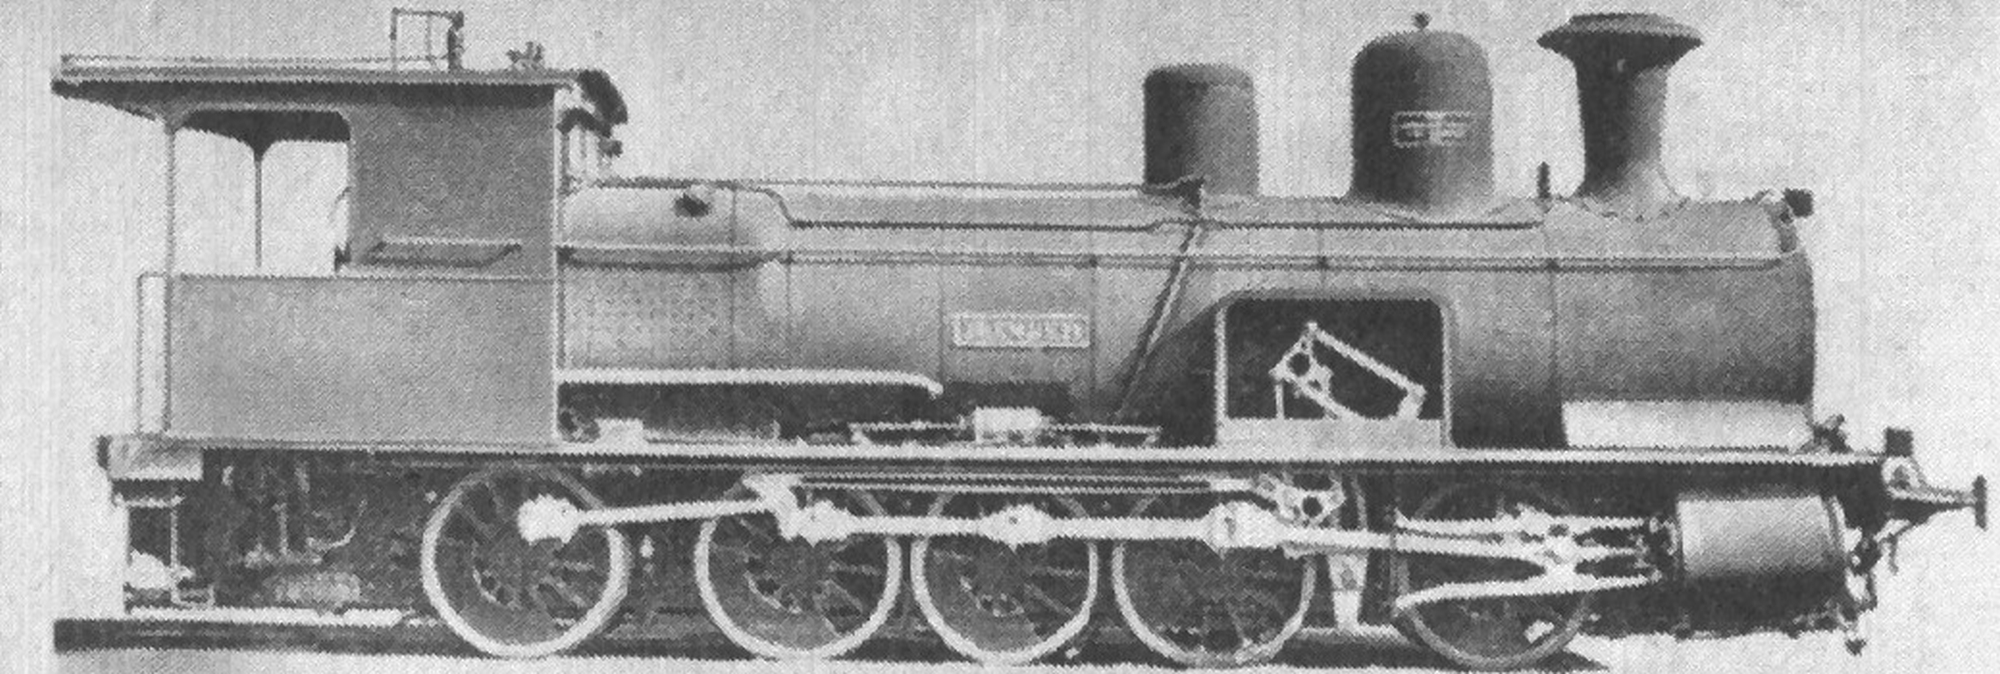 A locomotive on a company photo with easily recognizable lever mechanism